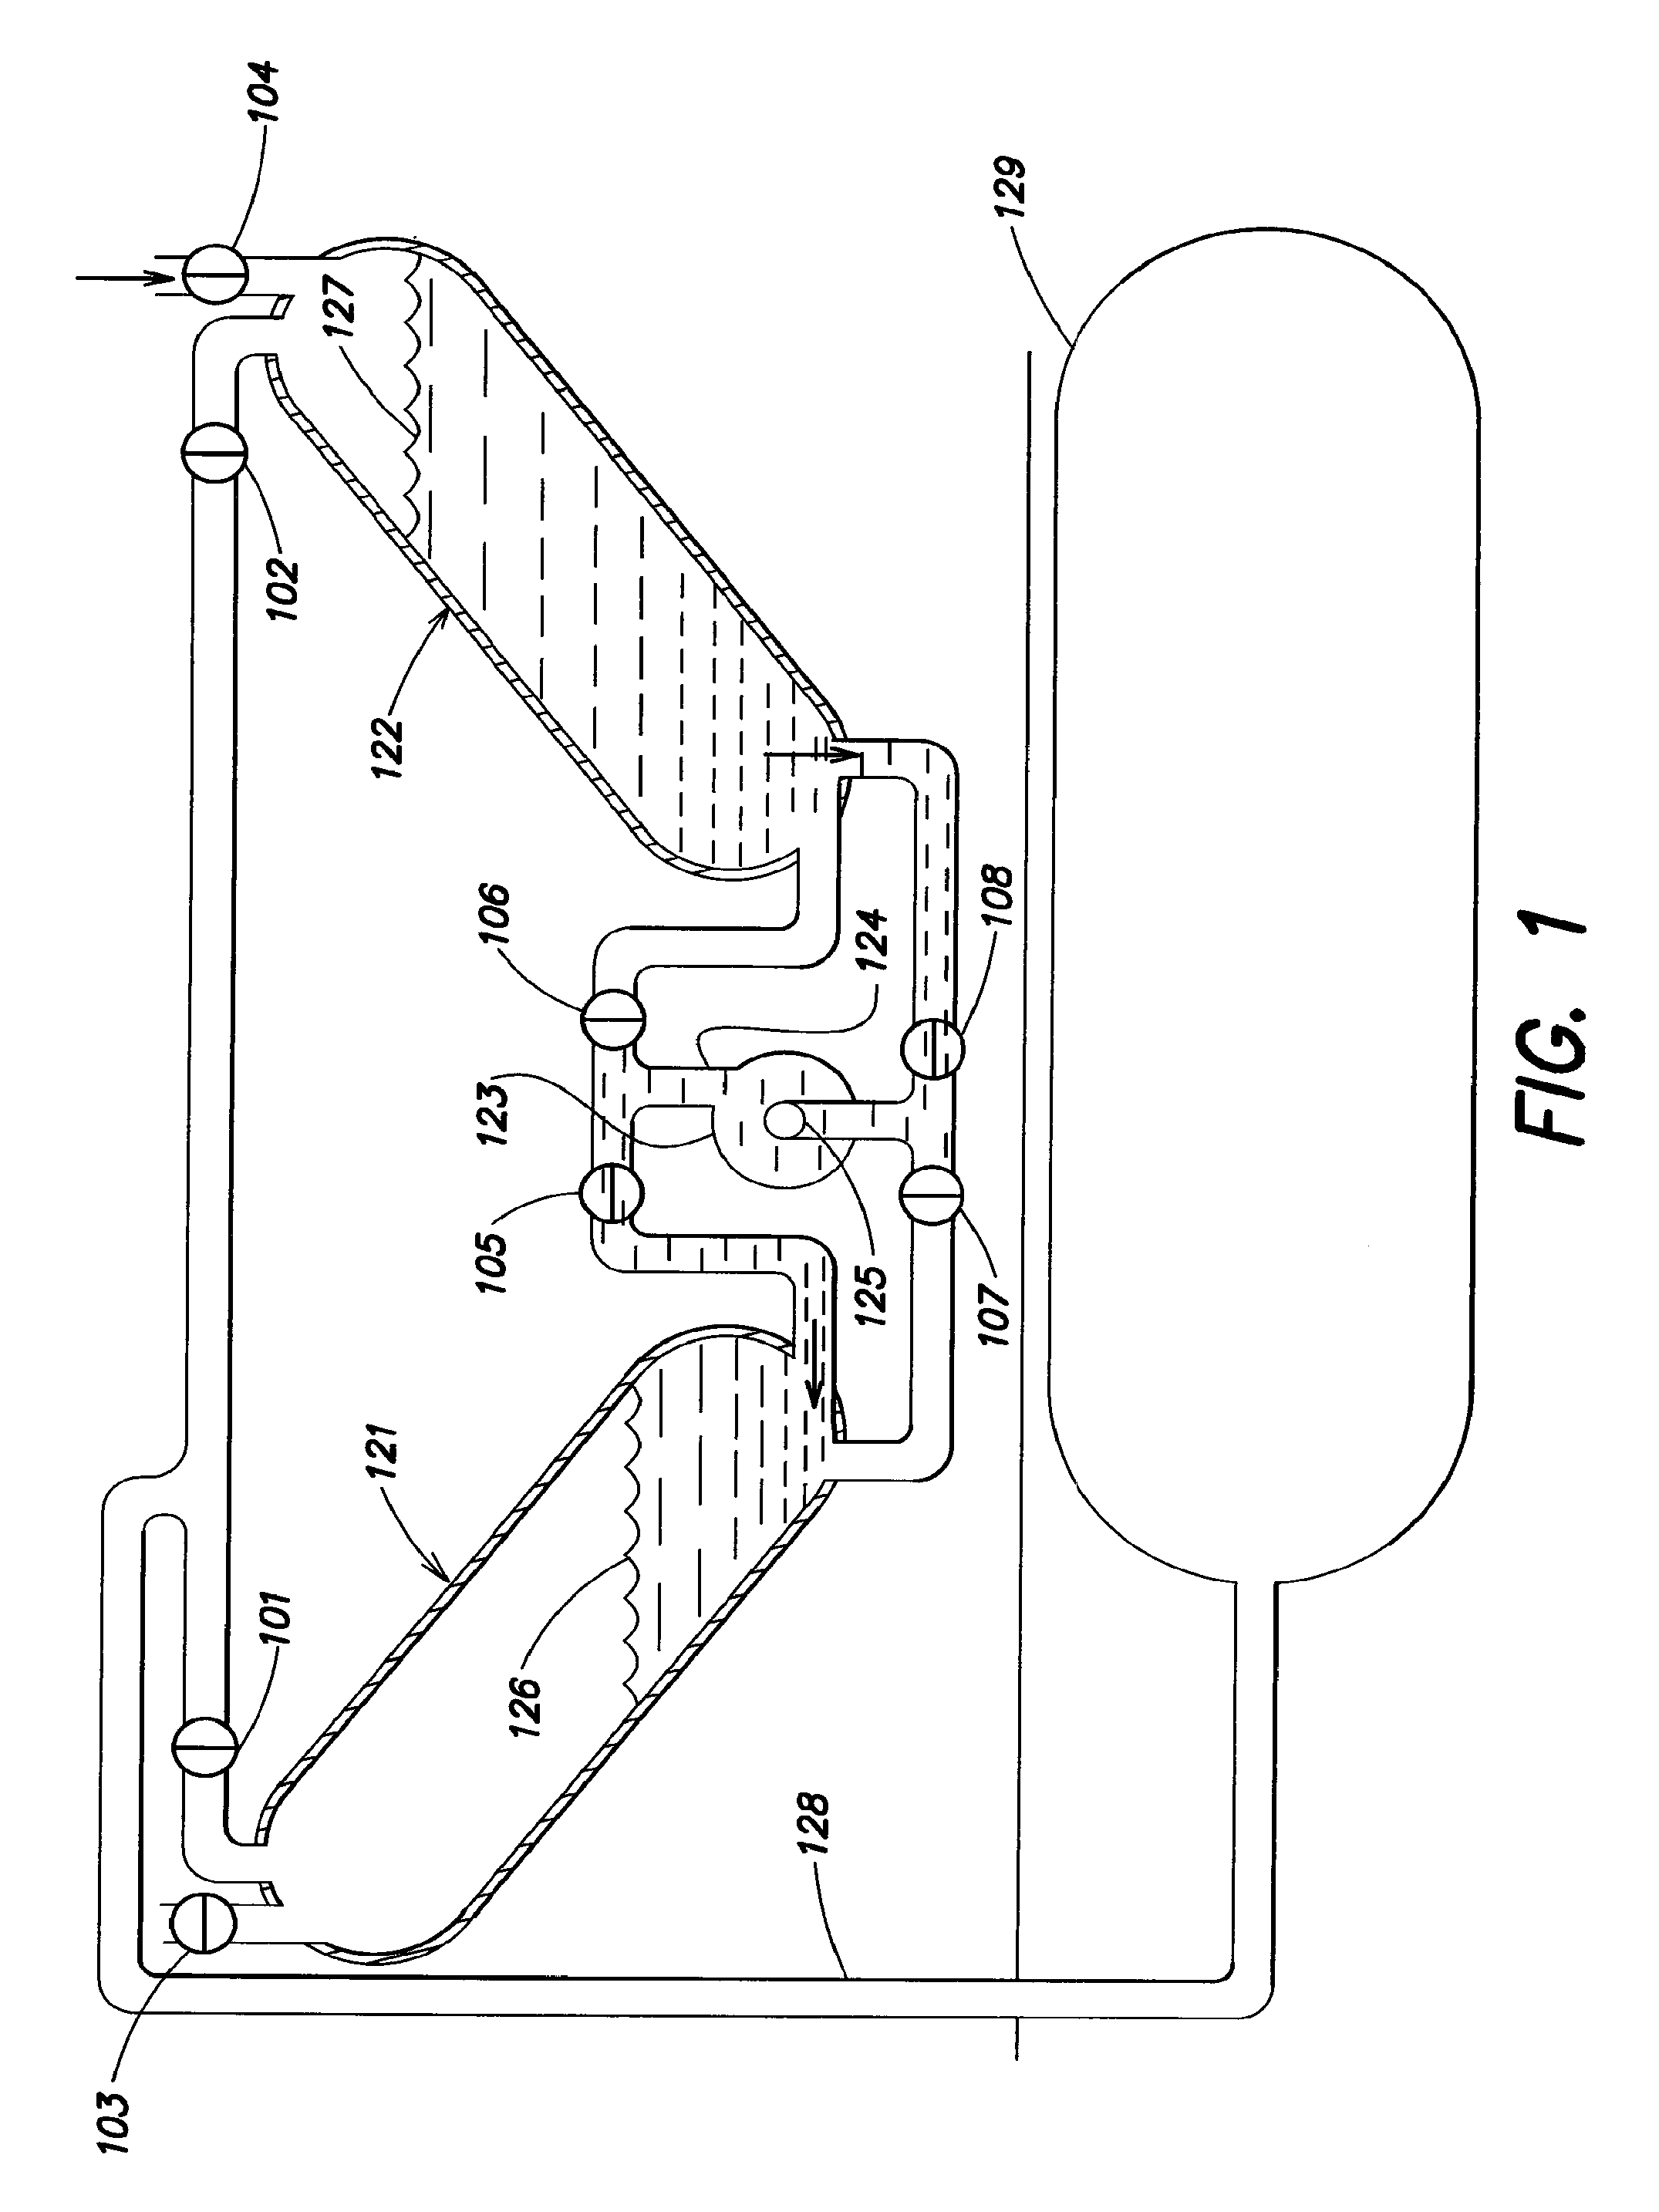 System and method for converting electrical energy into pressurized air and converting pressurized air into electricity